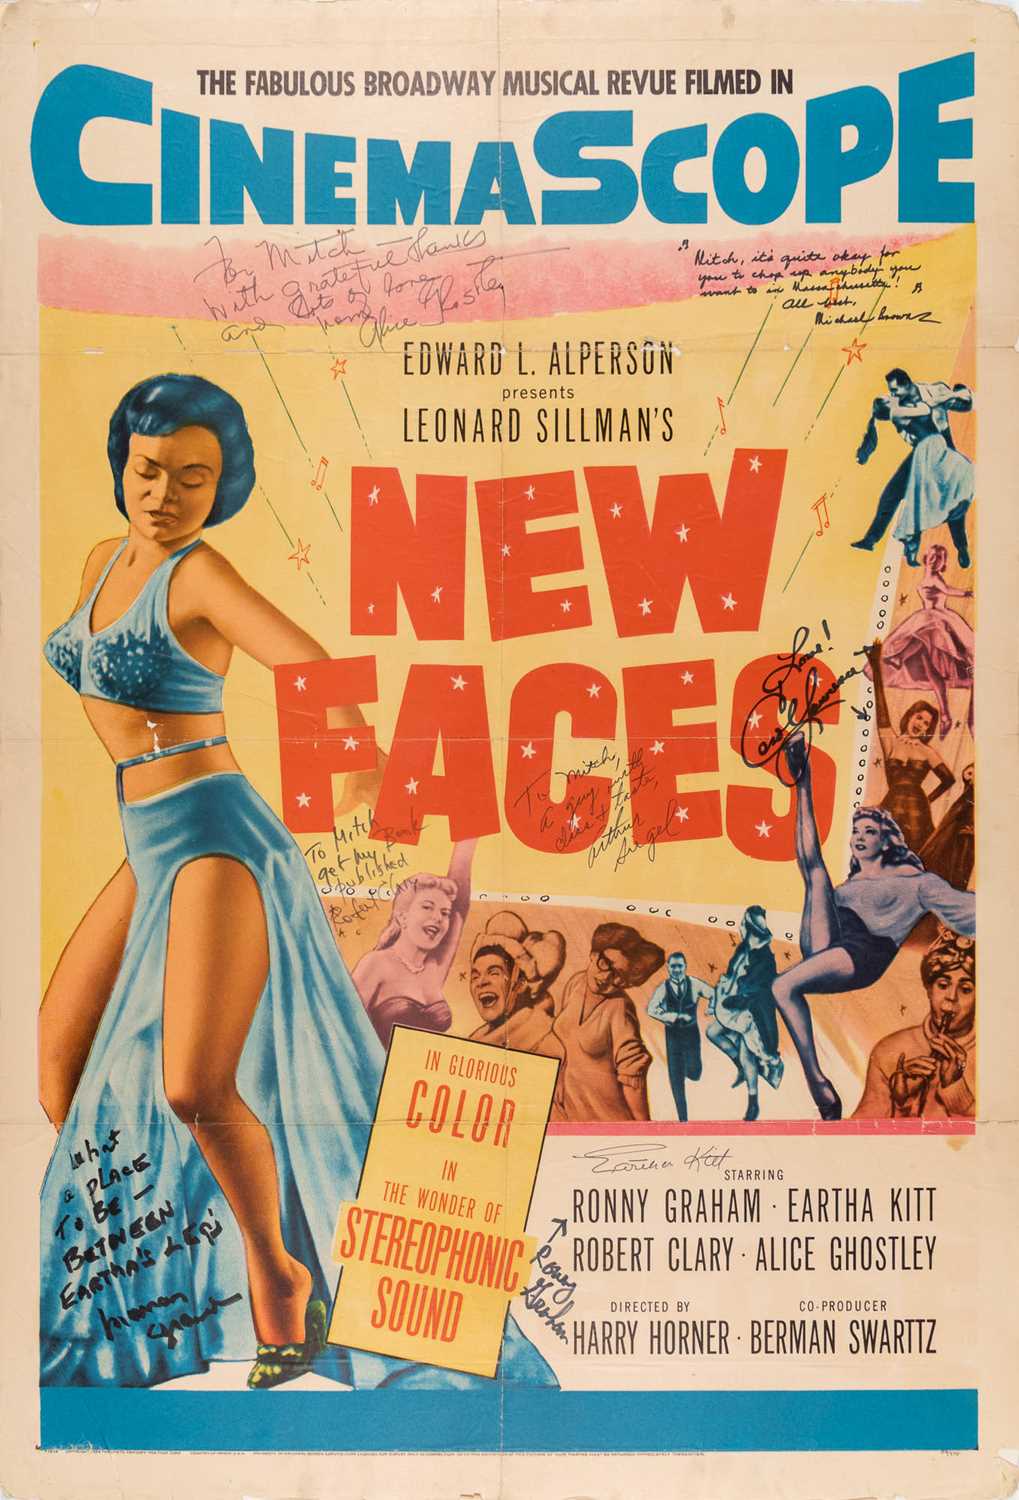 Lot 689 - The poster for New Faces with inscriptions and the signature of Eartha Kitt